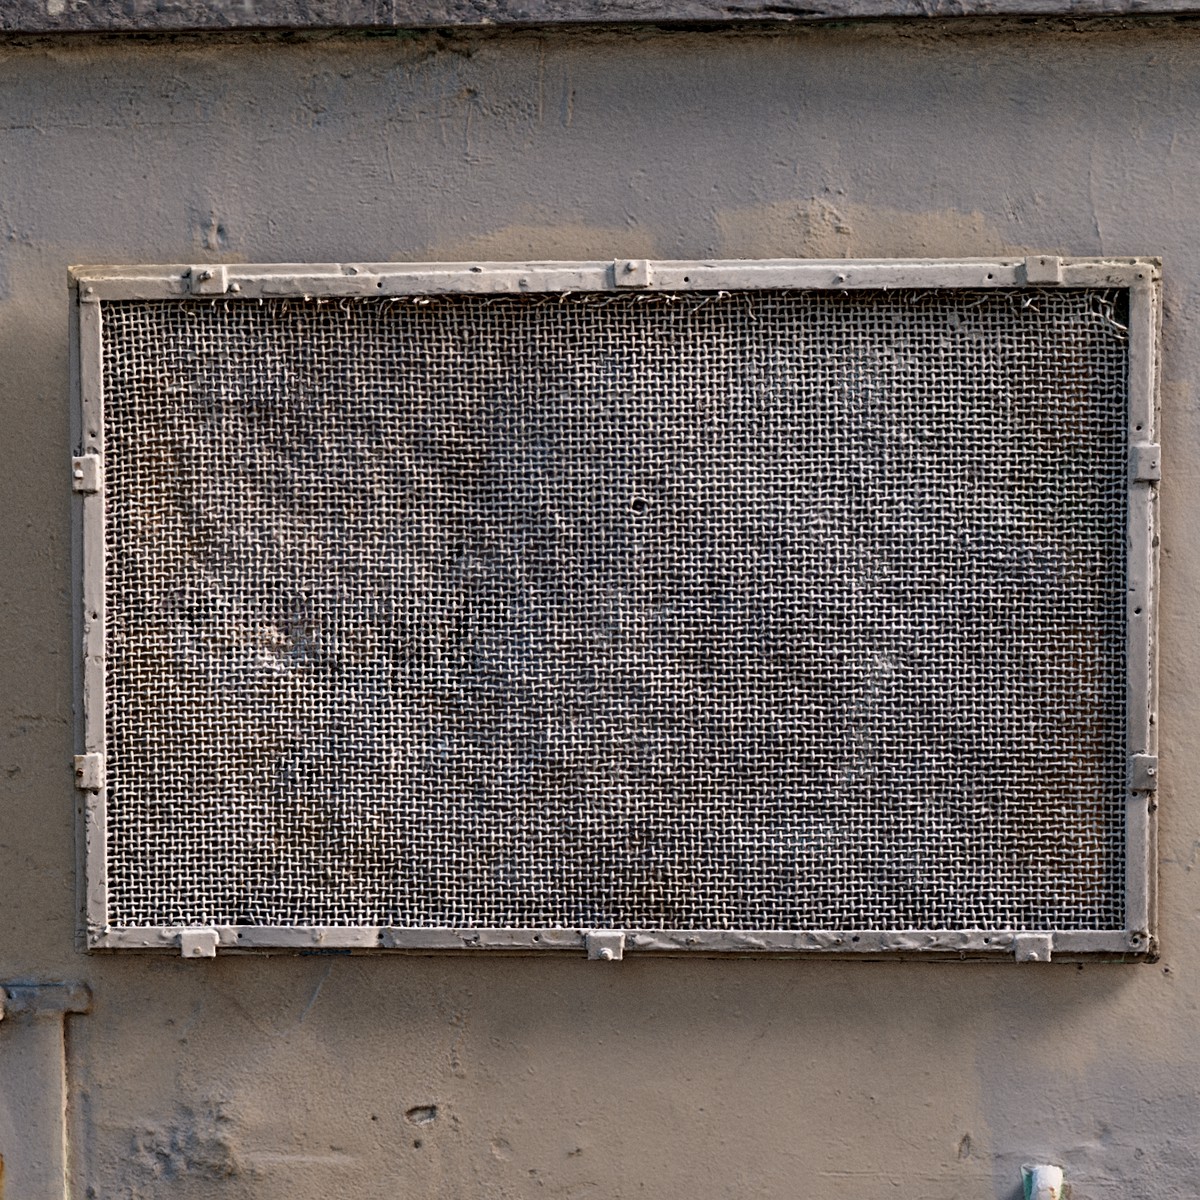 Old, painted fine-mesh screened window